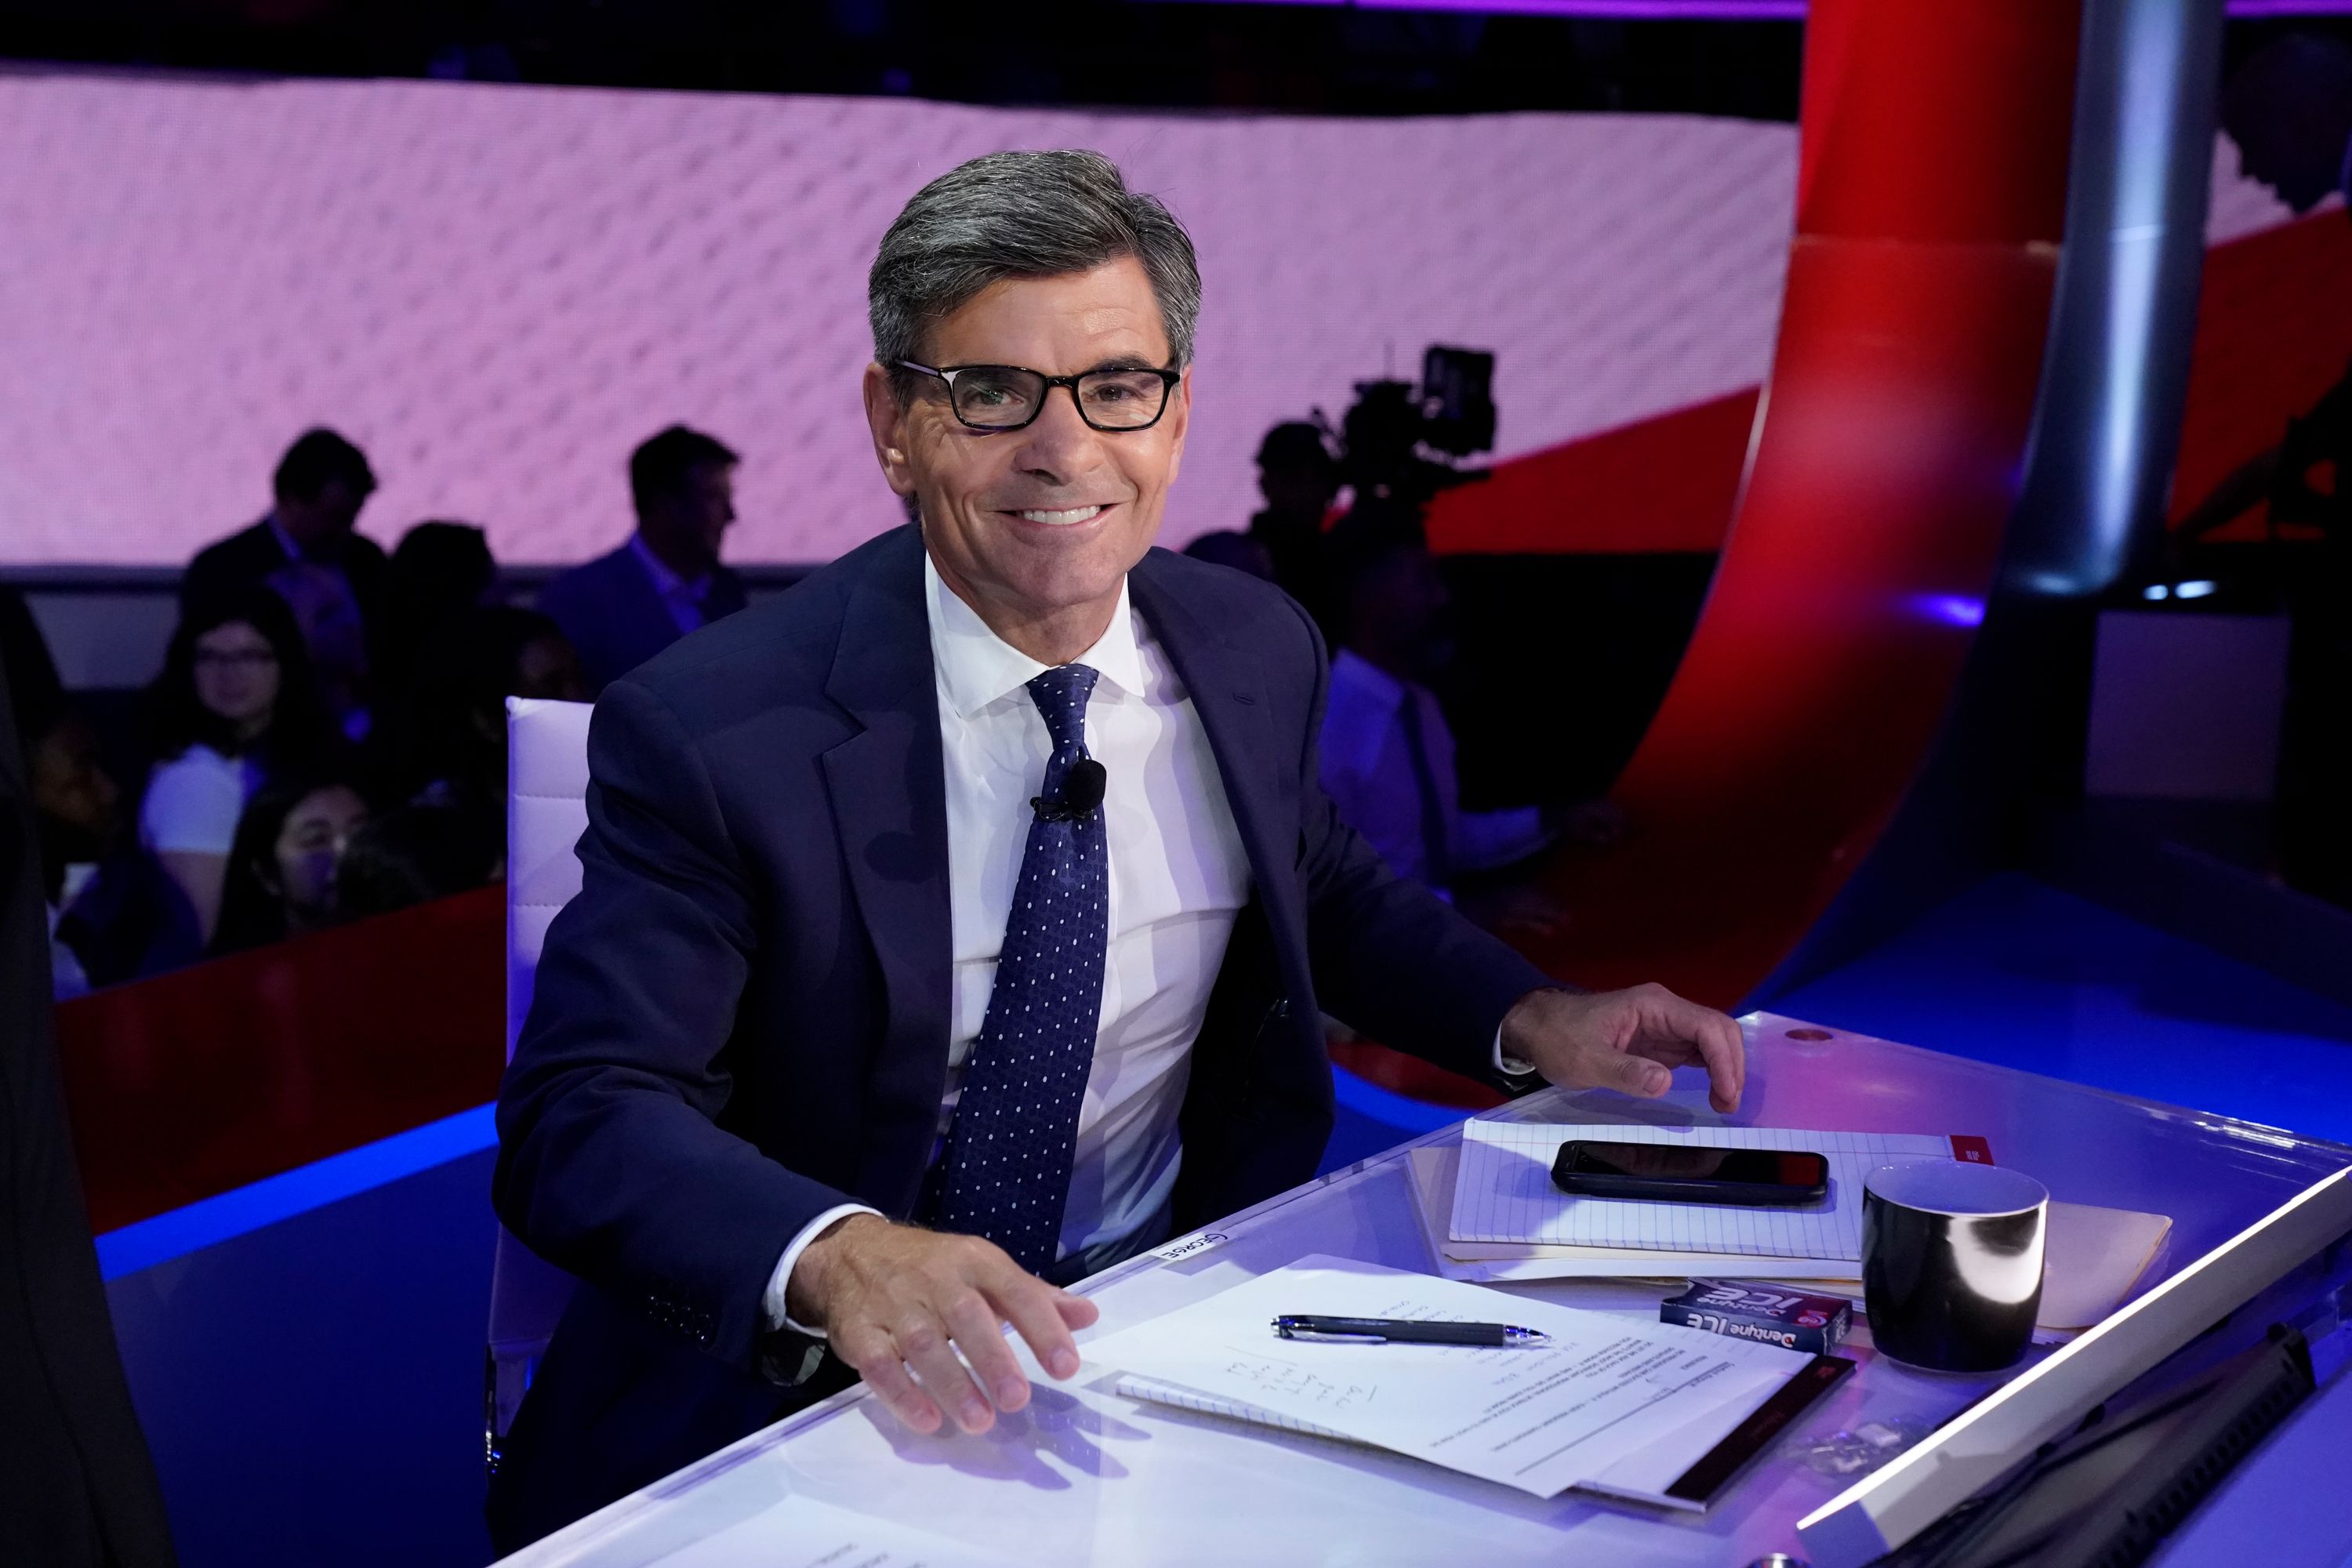 George Stephanopoulos at the Texas Southern University's Health & PE Center in Houston on September 12, 2019 | Photo: Heidi Gutman/Walt Disney Television/Getty Images